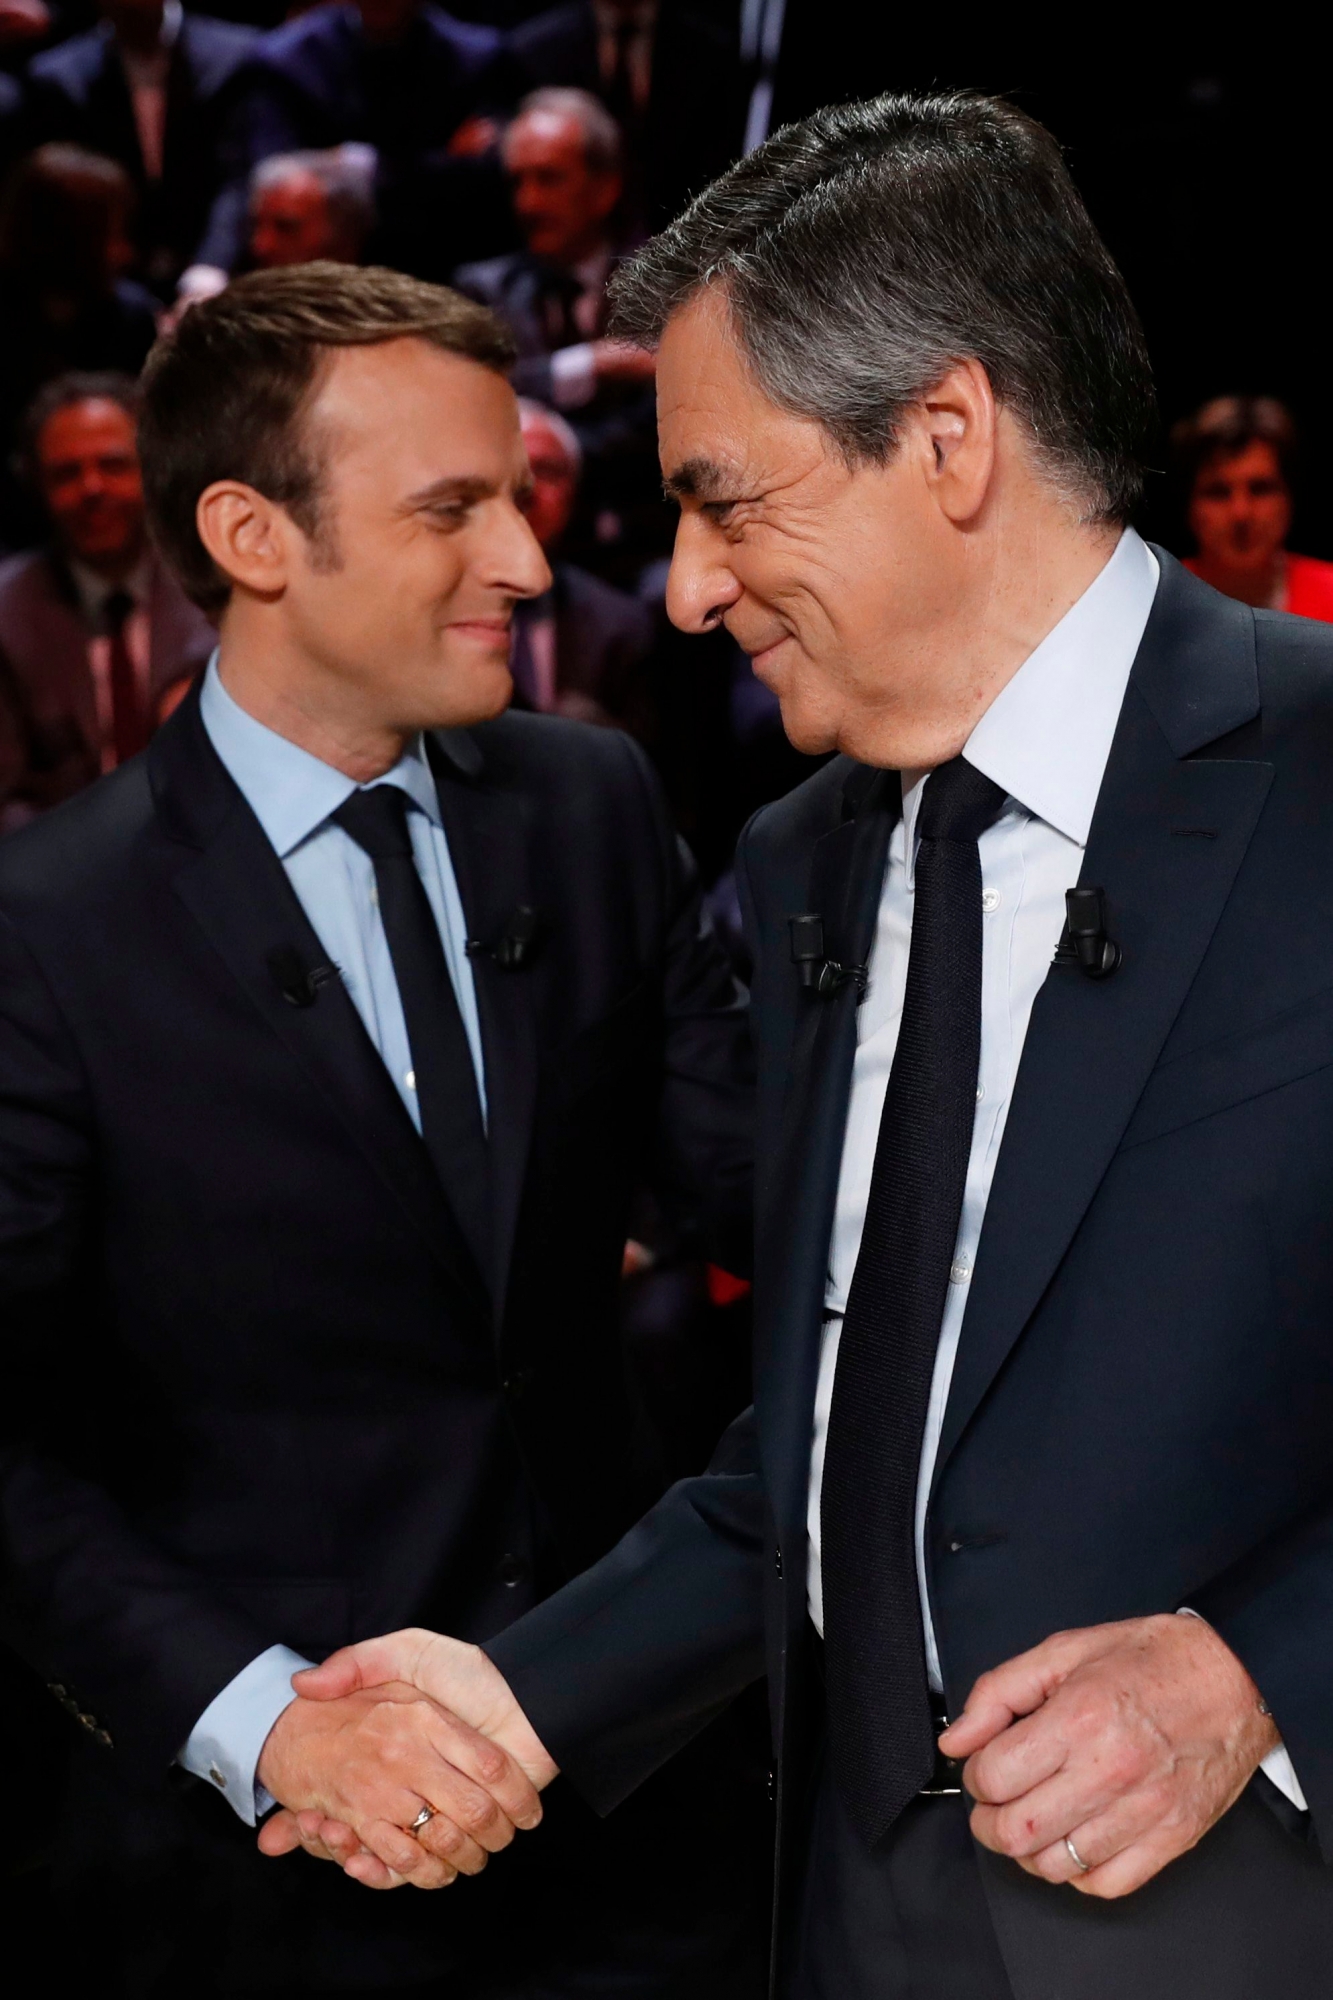 epa05860703 French right-wing 'Les Republicains' (LR) party candidate Francois Fillon (R) shakes hands with 'En Marche!' movement candidate Emmanuel Macron (L) prior to the start of a debate of candidates organised by French private TV channel TF1 in Aubervilliers, outside Paris, France, 20 March 2017.  French presidential elections are planned for 23 April and 07 May 2017.  EPA/PATRICK KOVARIK / POOL MAXPPP OUT FRANKREICH WAHLEN PRAESIDENT 2017 FERNSEHDEBATTE